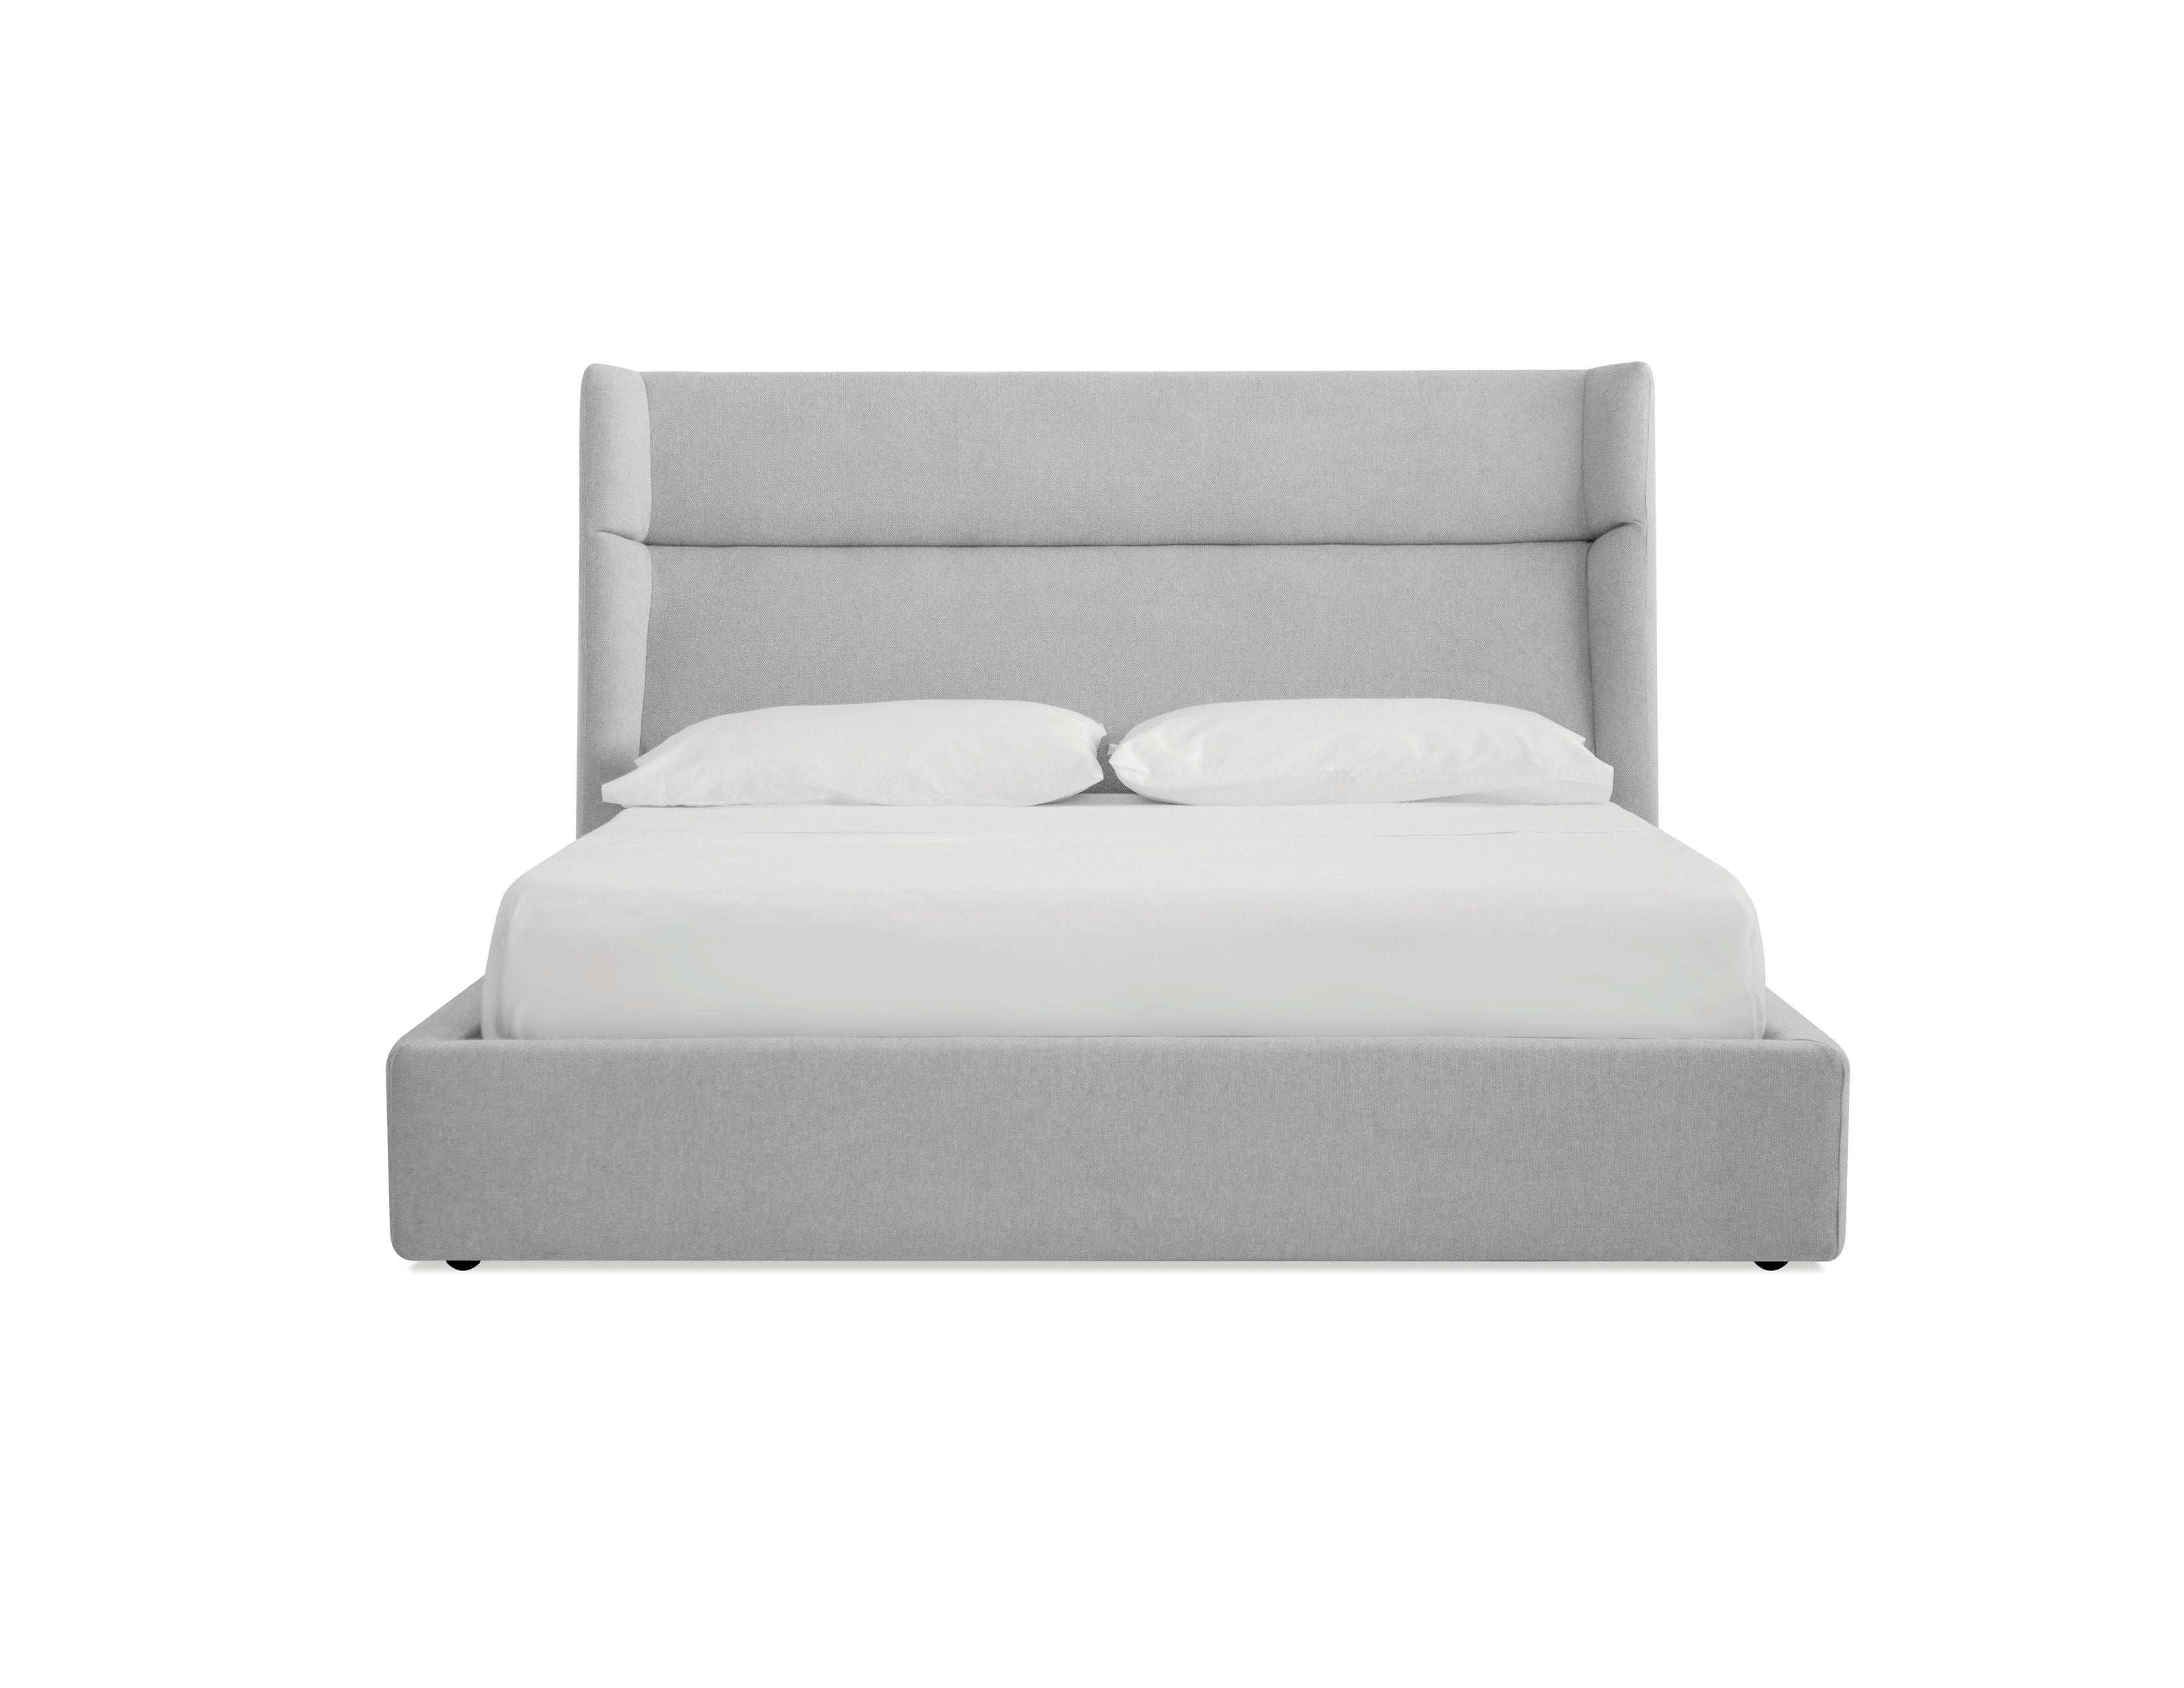 COVE Storage Bed in Heather Grey Chenille